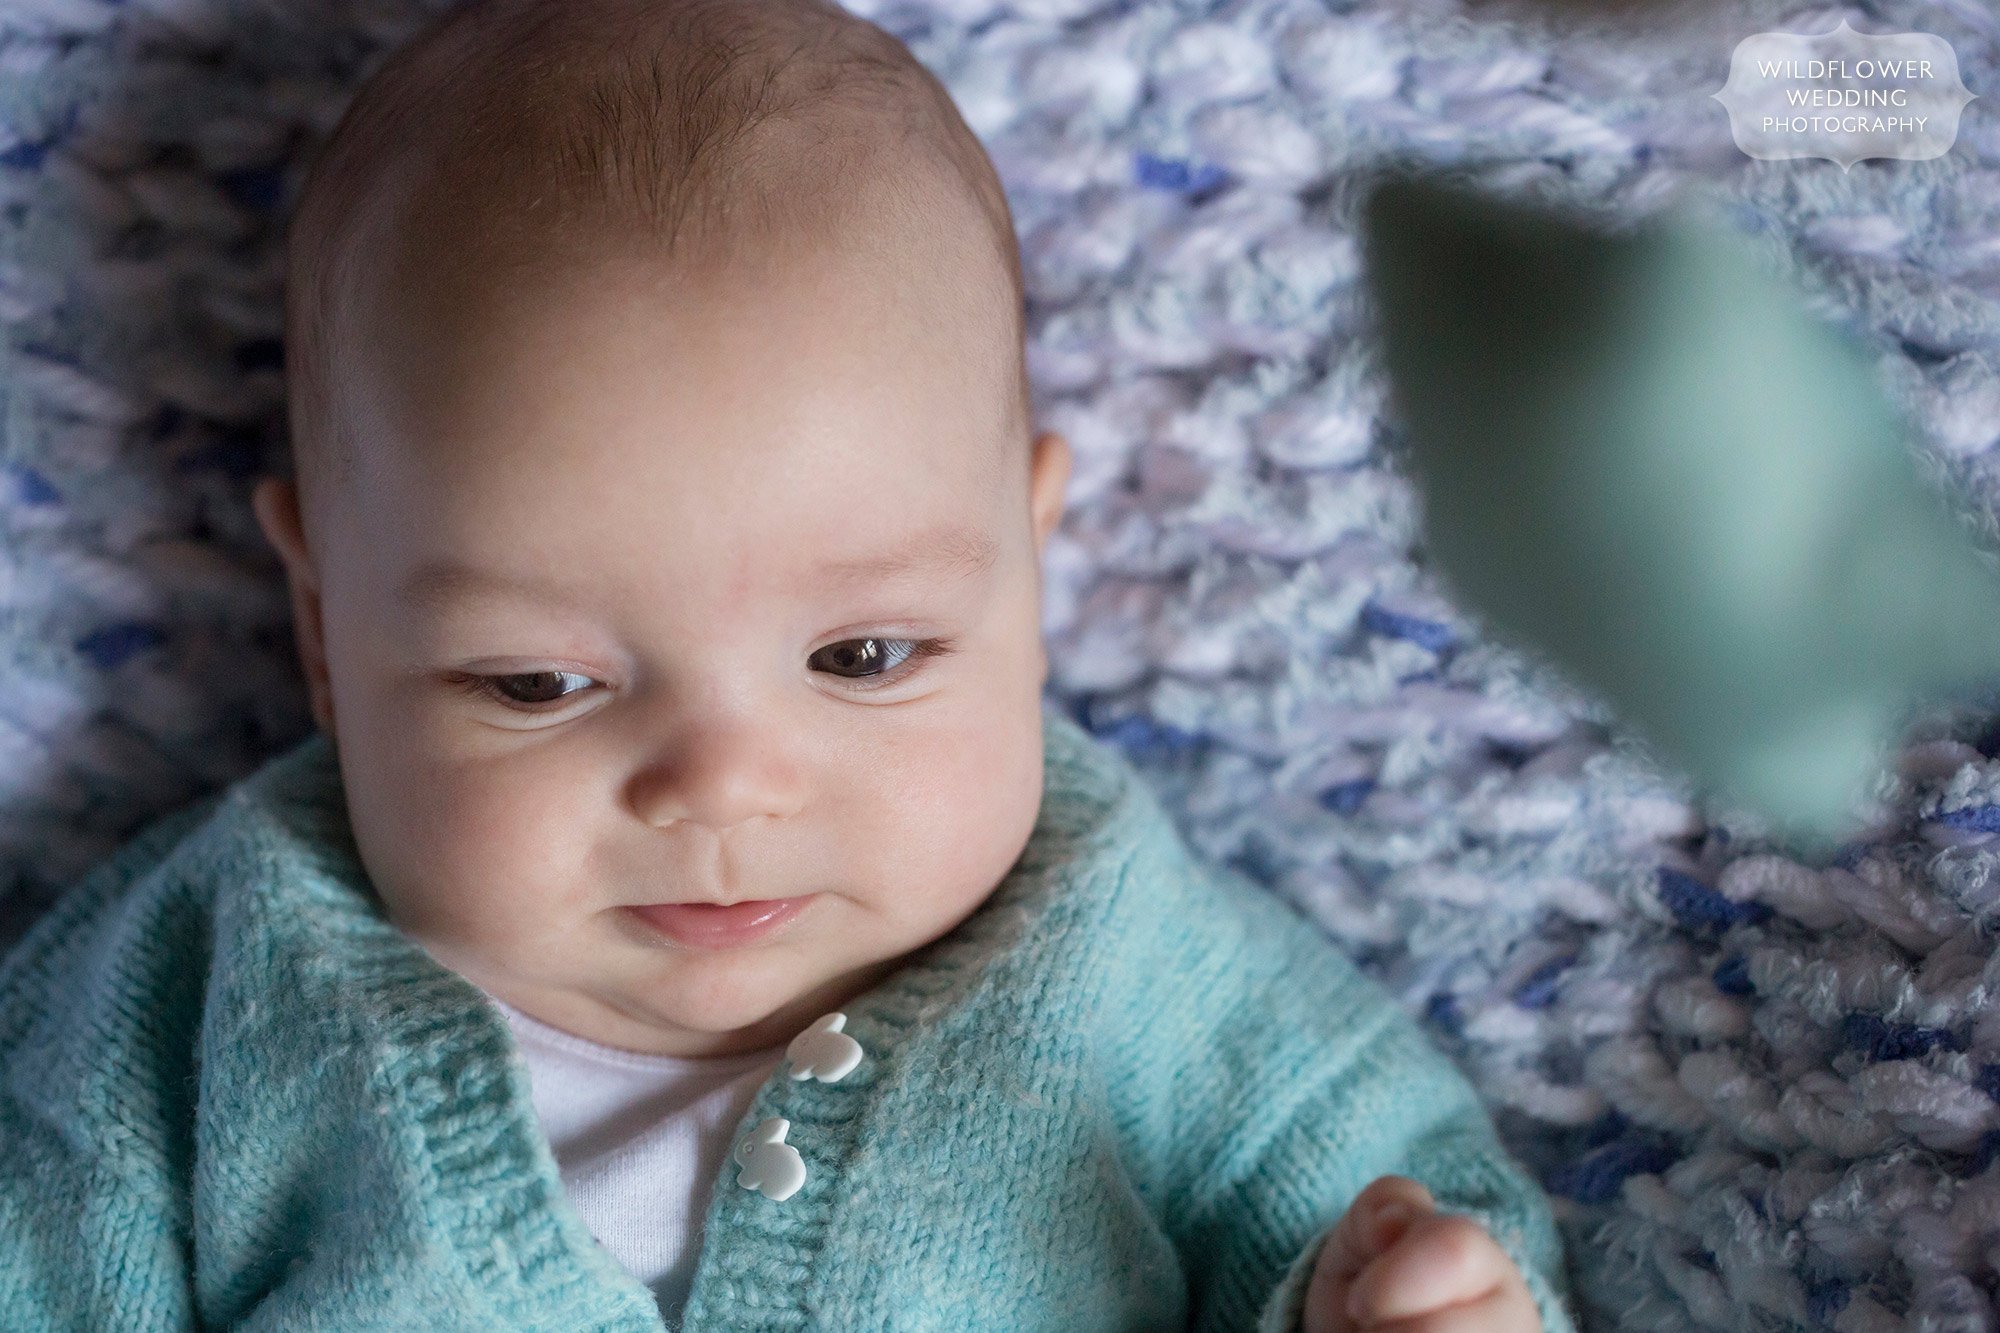 Cute baby photography with handknit mint sweater.